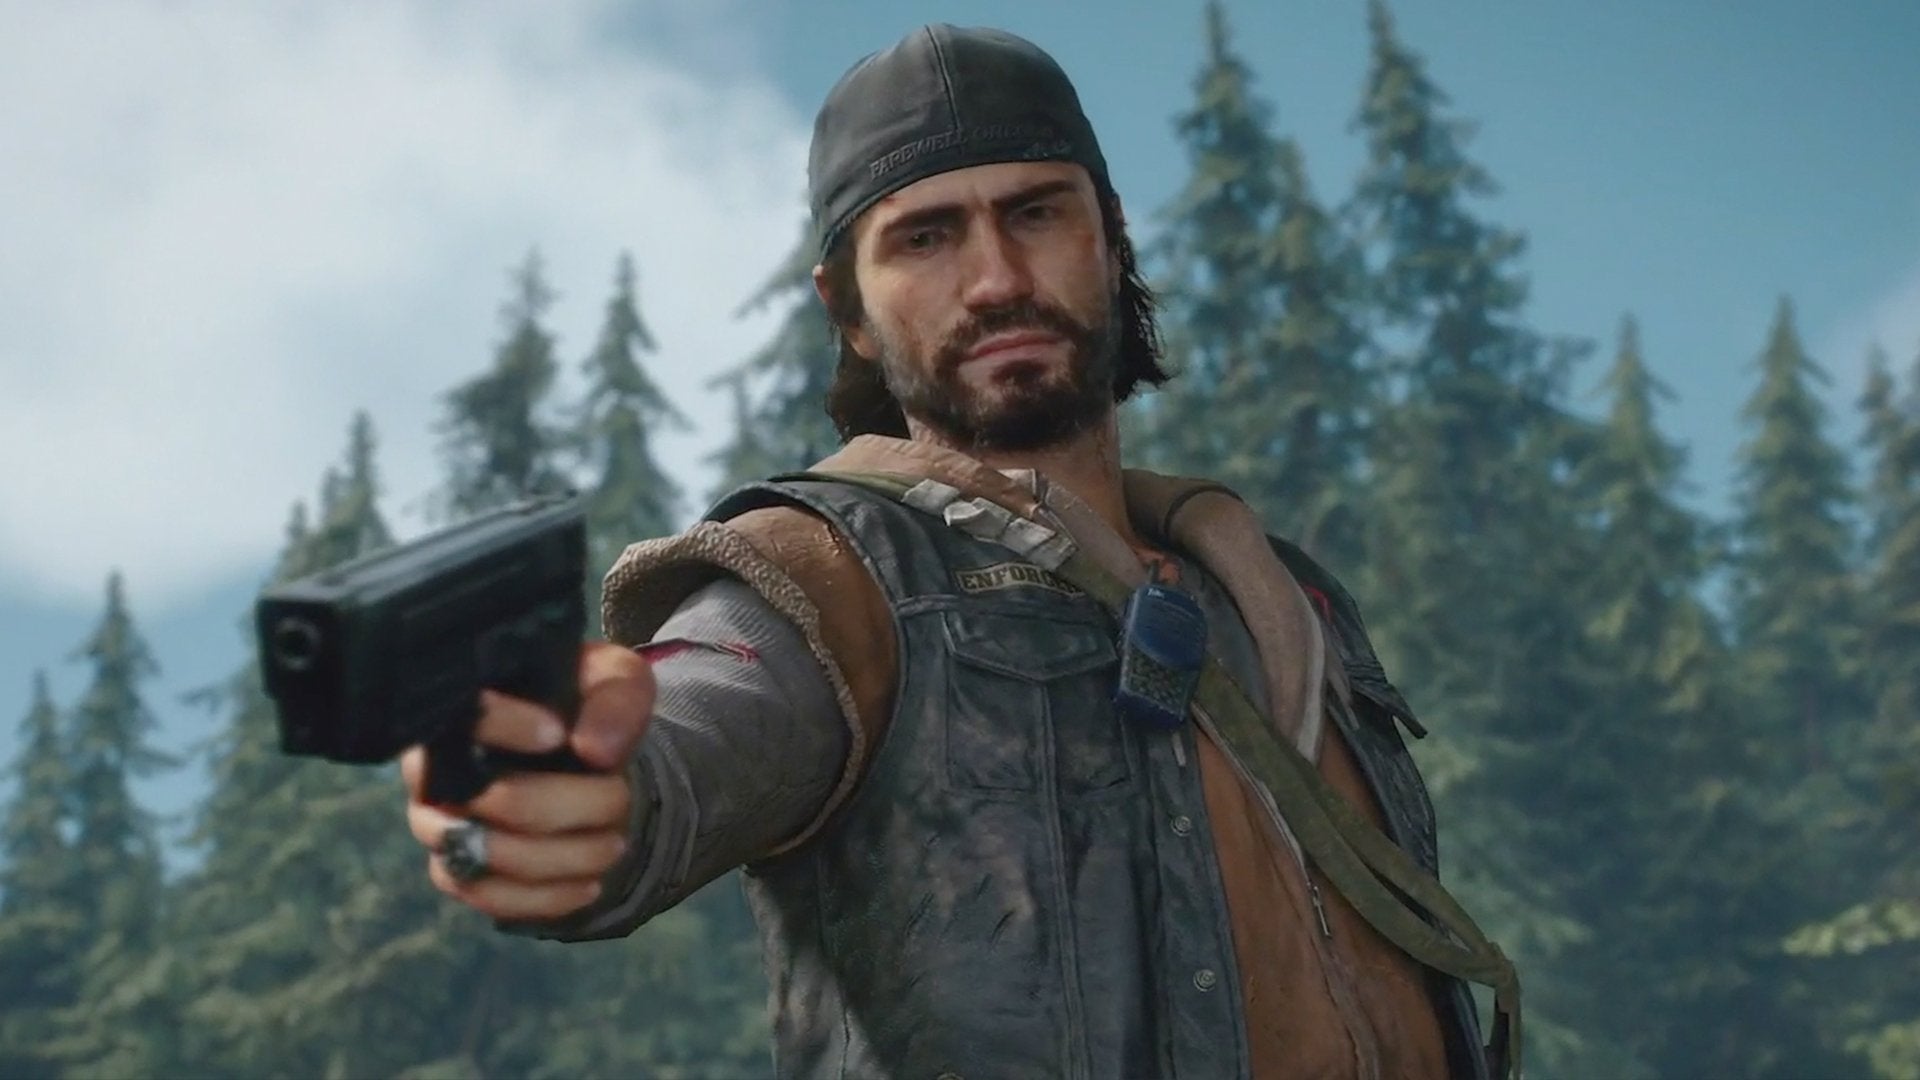 Image for Days Gone, Anthem and The Division 2 have all fallen to their lowest prices so far